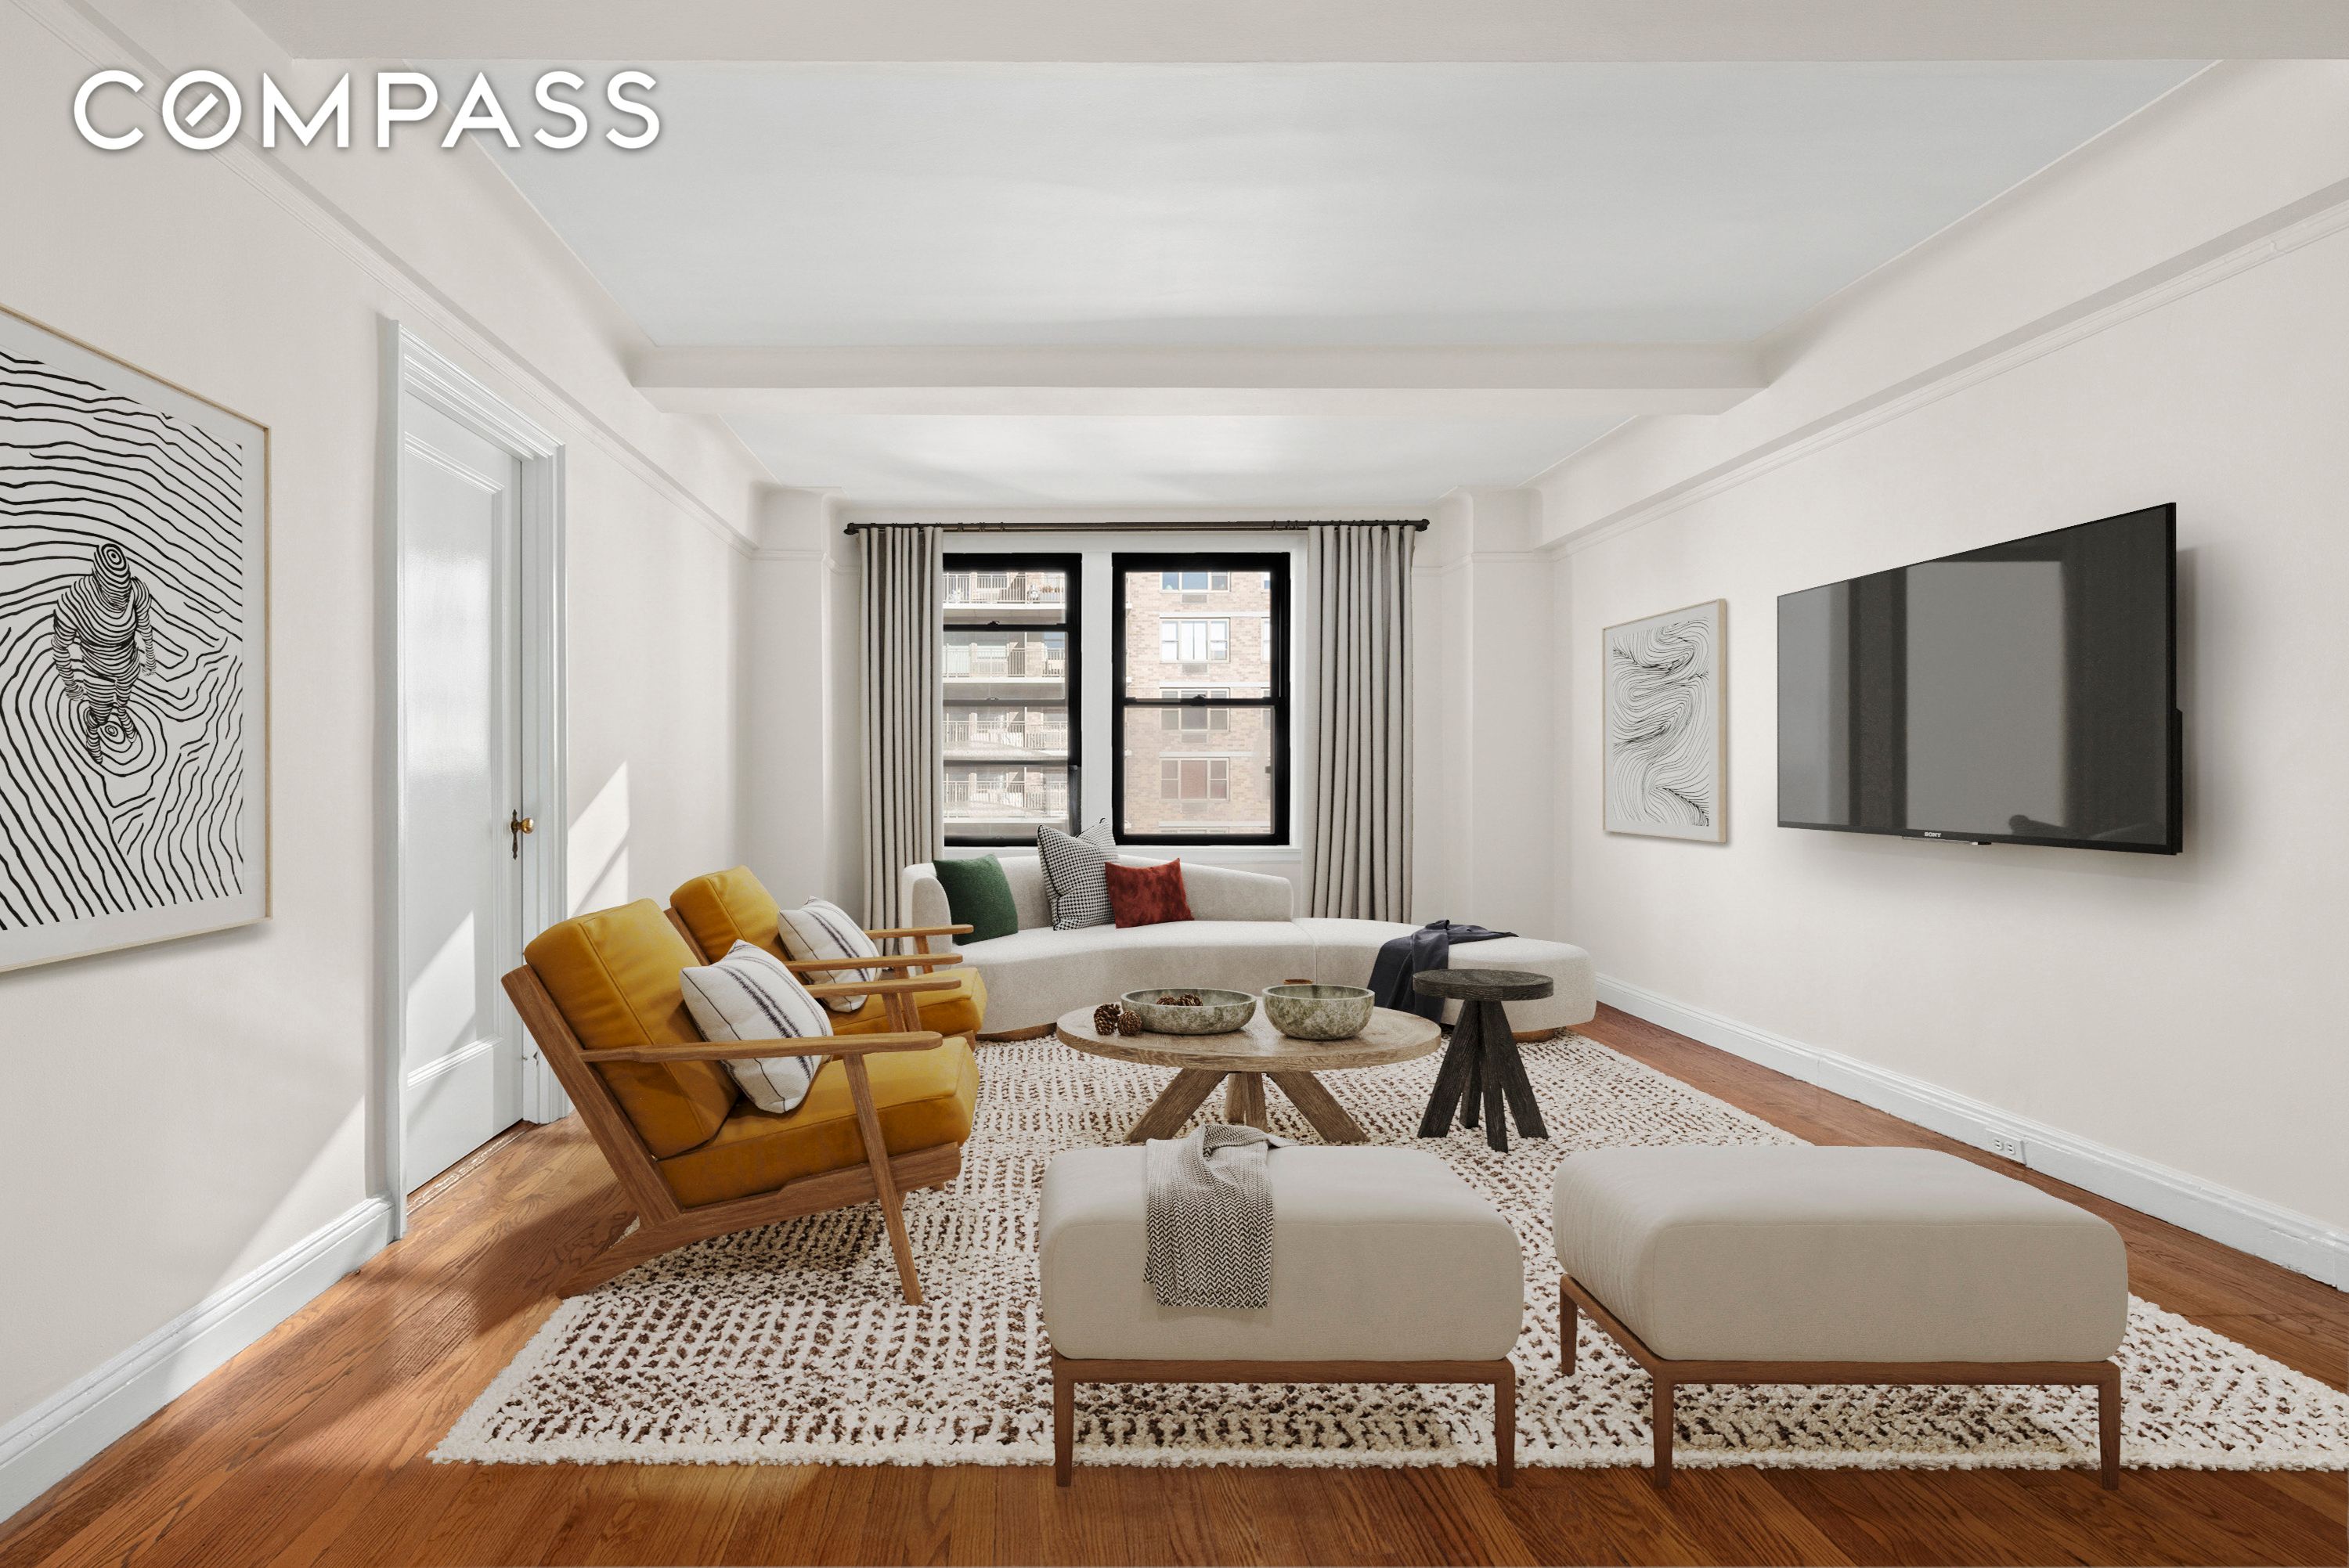 308 East 79th Street 15E, Upper East Side, Upper East Side, NYC - 1 Bedrooms  
1 Bathrooms  
3 Rooms - 